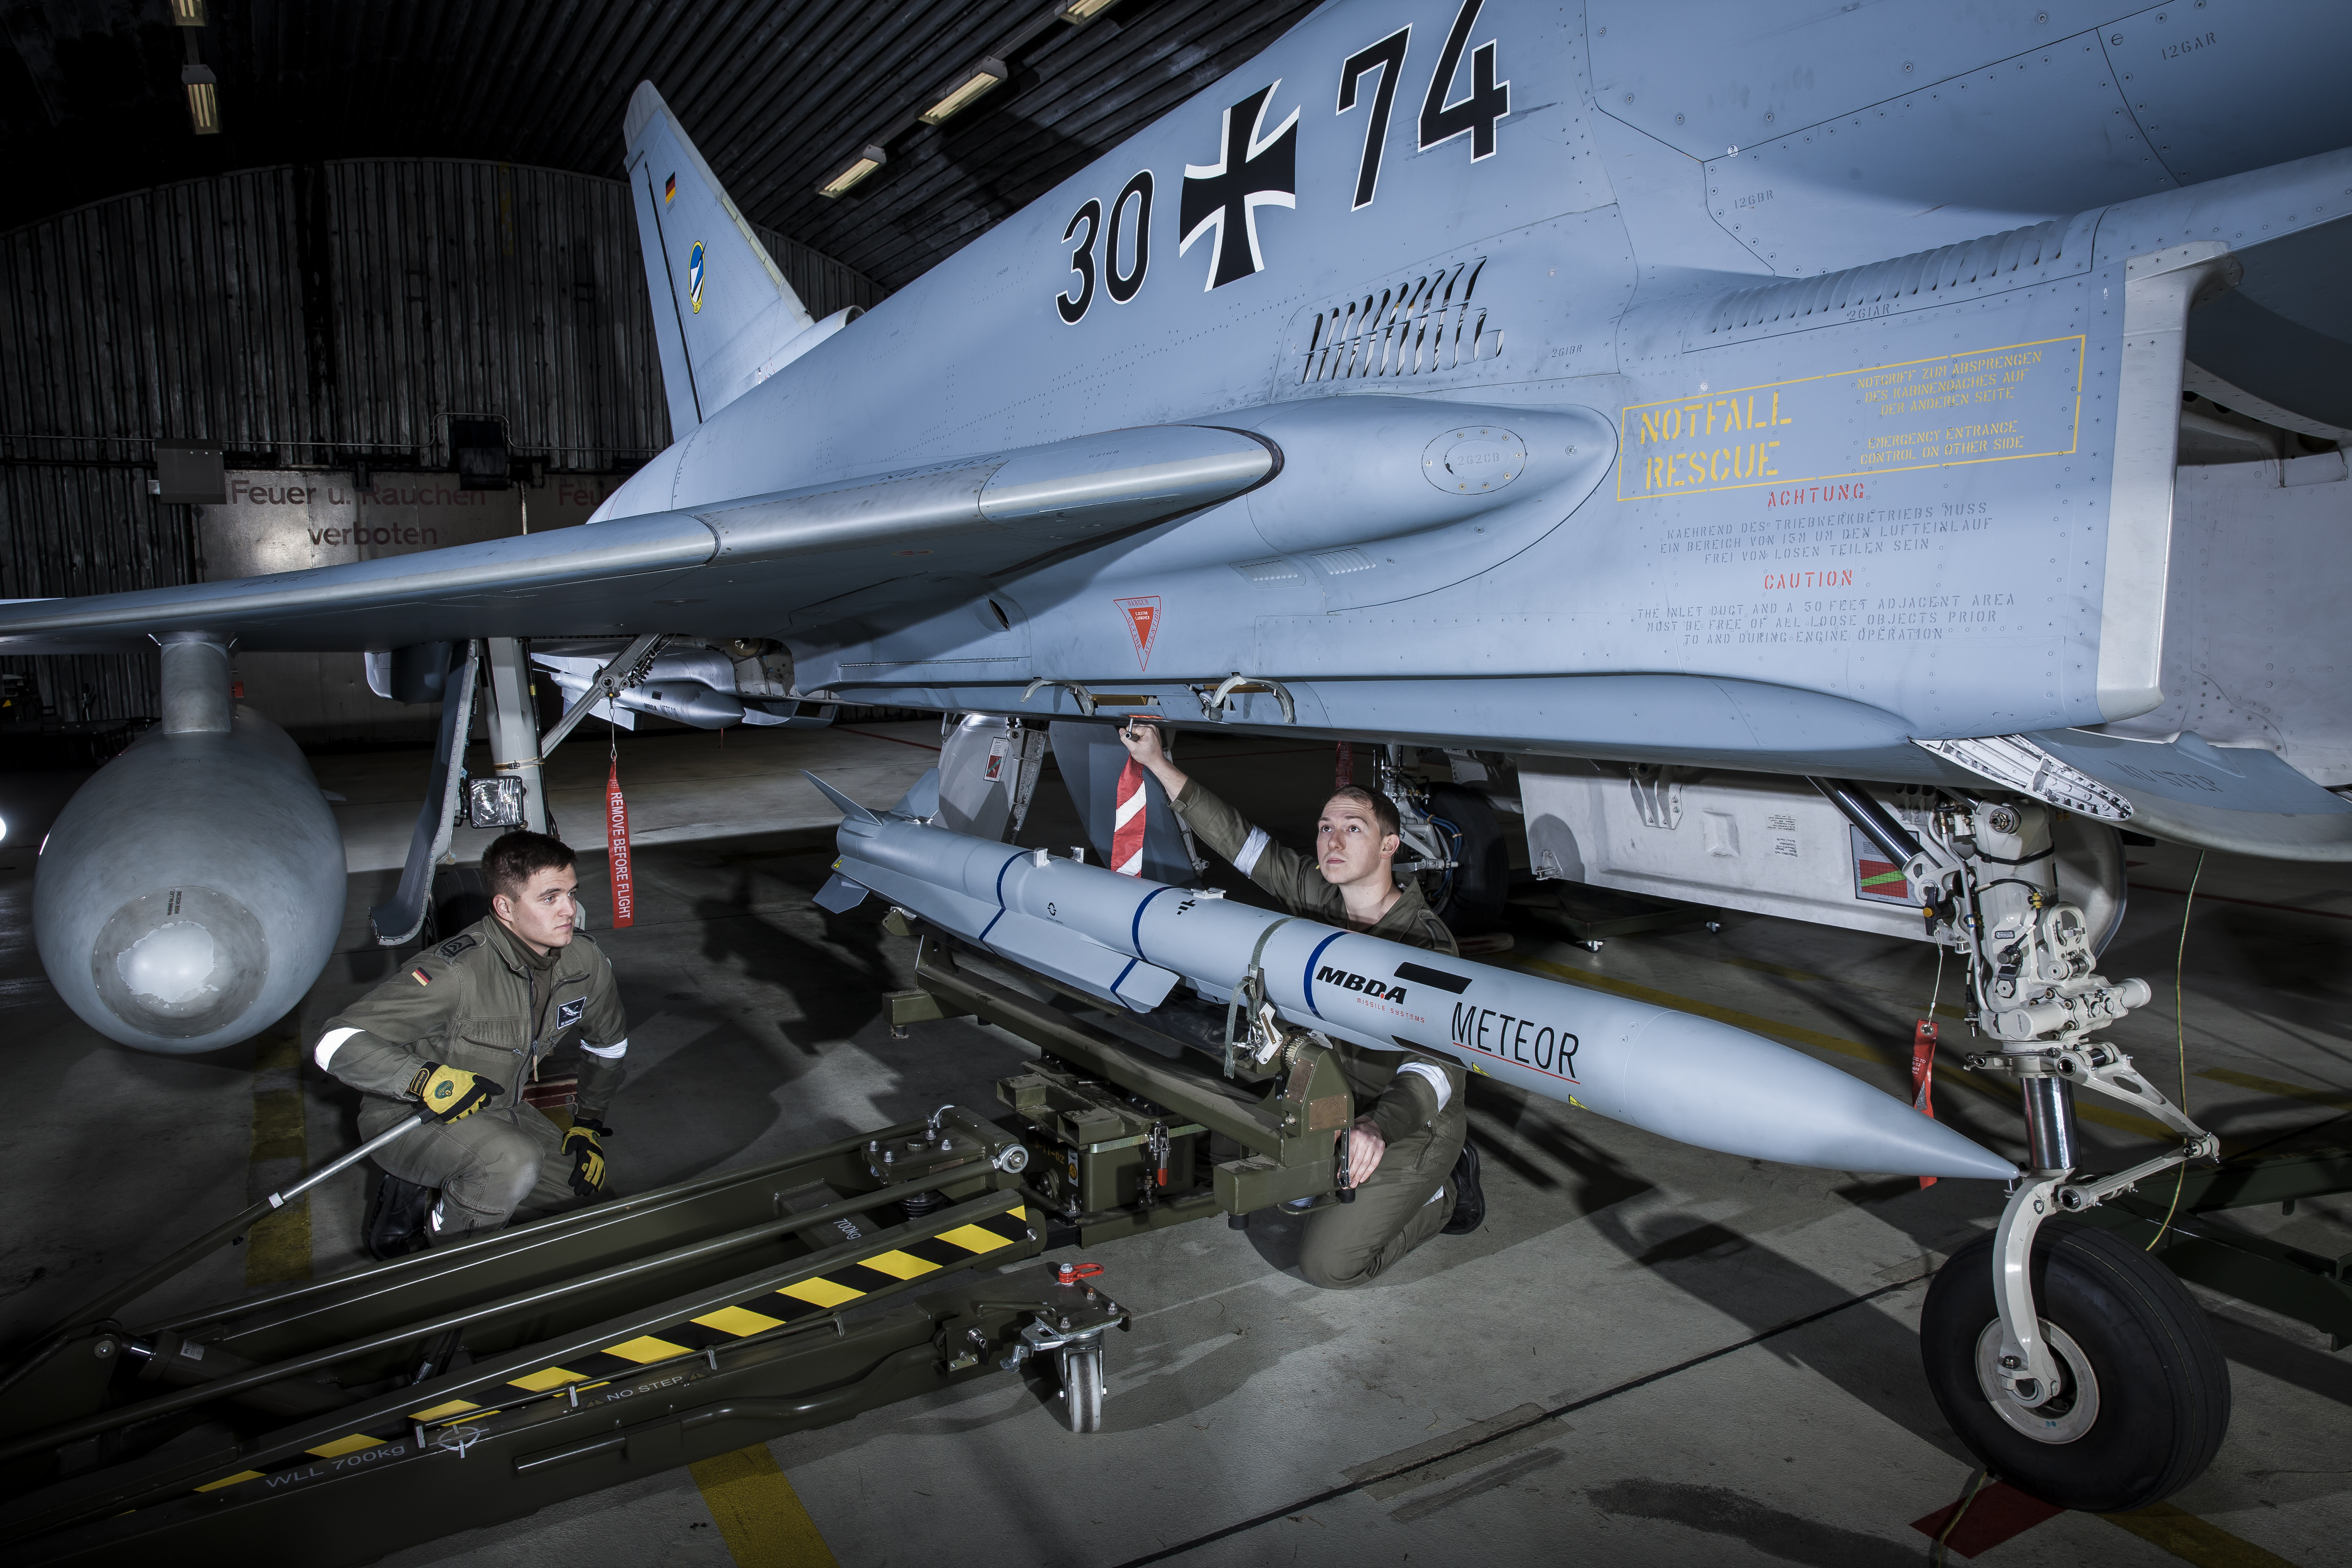 Luftwaffe ground personnel load a Meteor beyond visual-range air-to-air missile (BVRAAM) on a Eurofighter combat aircraft of the German Air Forceâ€™s 74th Fighter Squadron, based at Neuburg Donau. (MBDA photo)